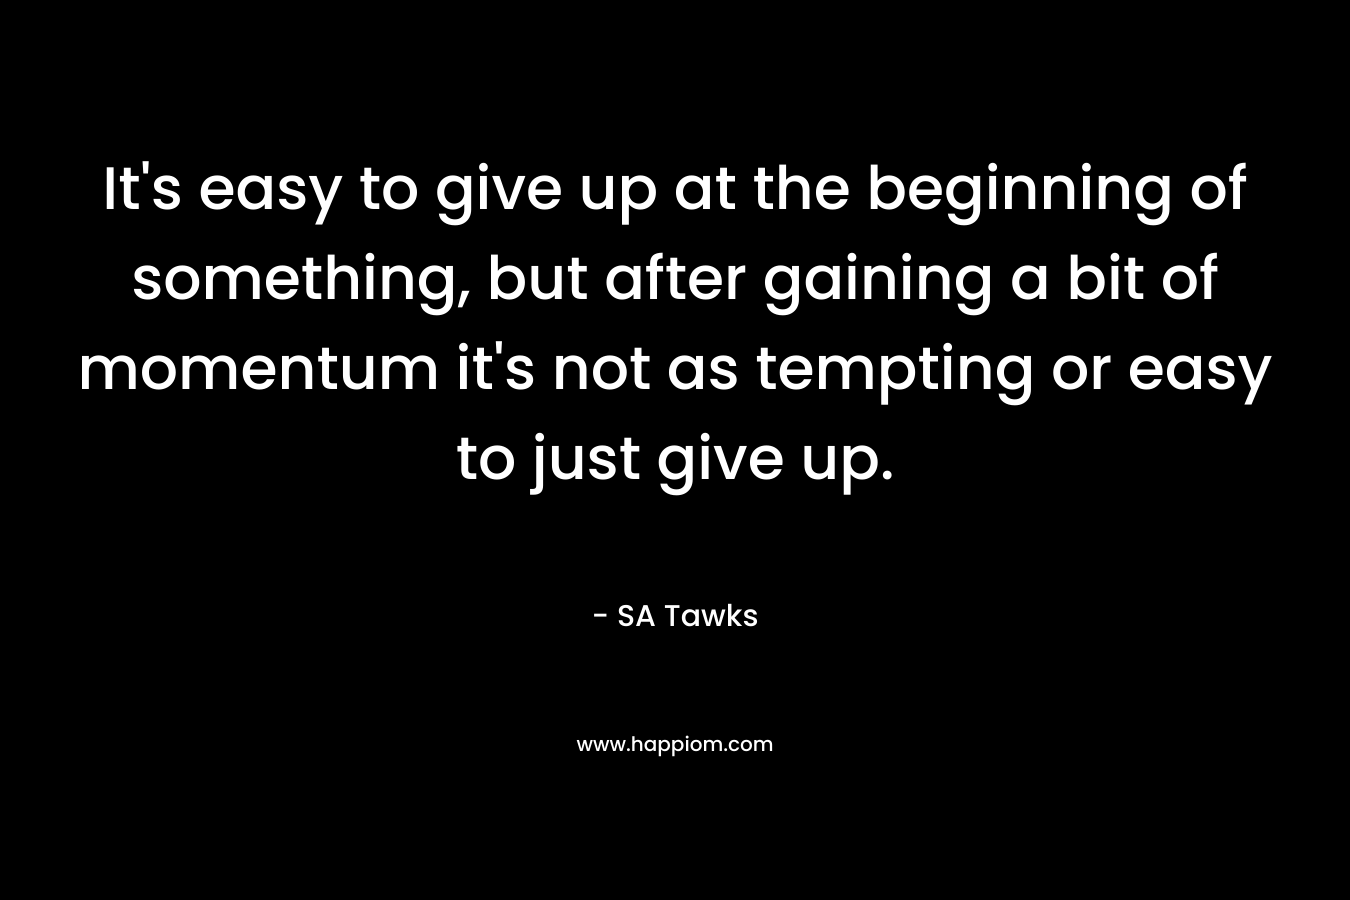 It's easy to give up at the beginning of something, but after gaining a bit of momentum it's not as tempting or easy to just give up.